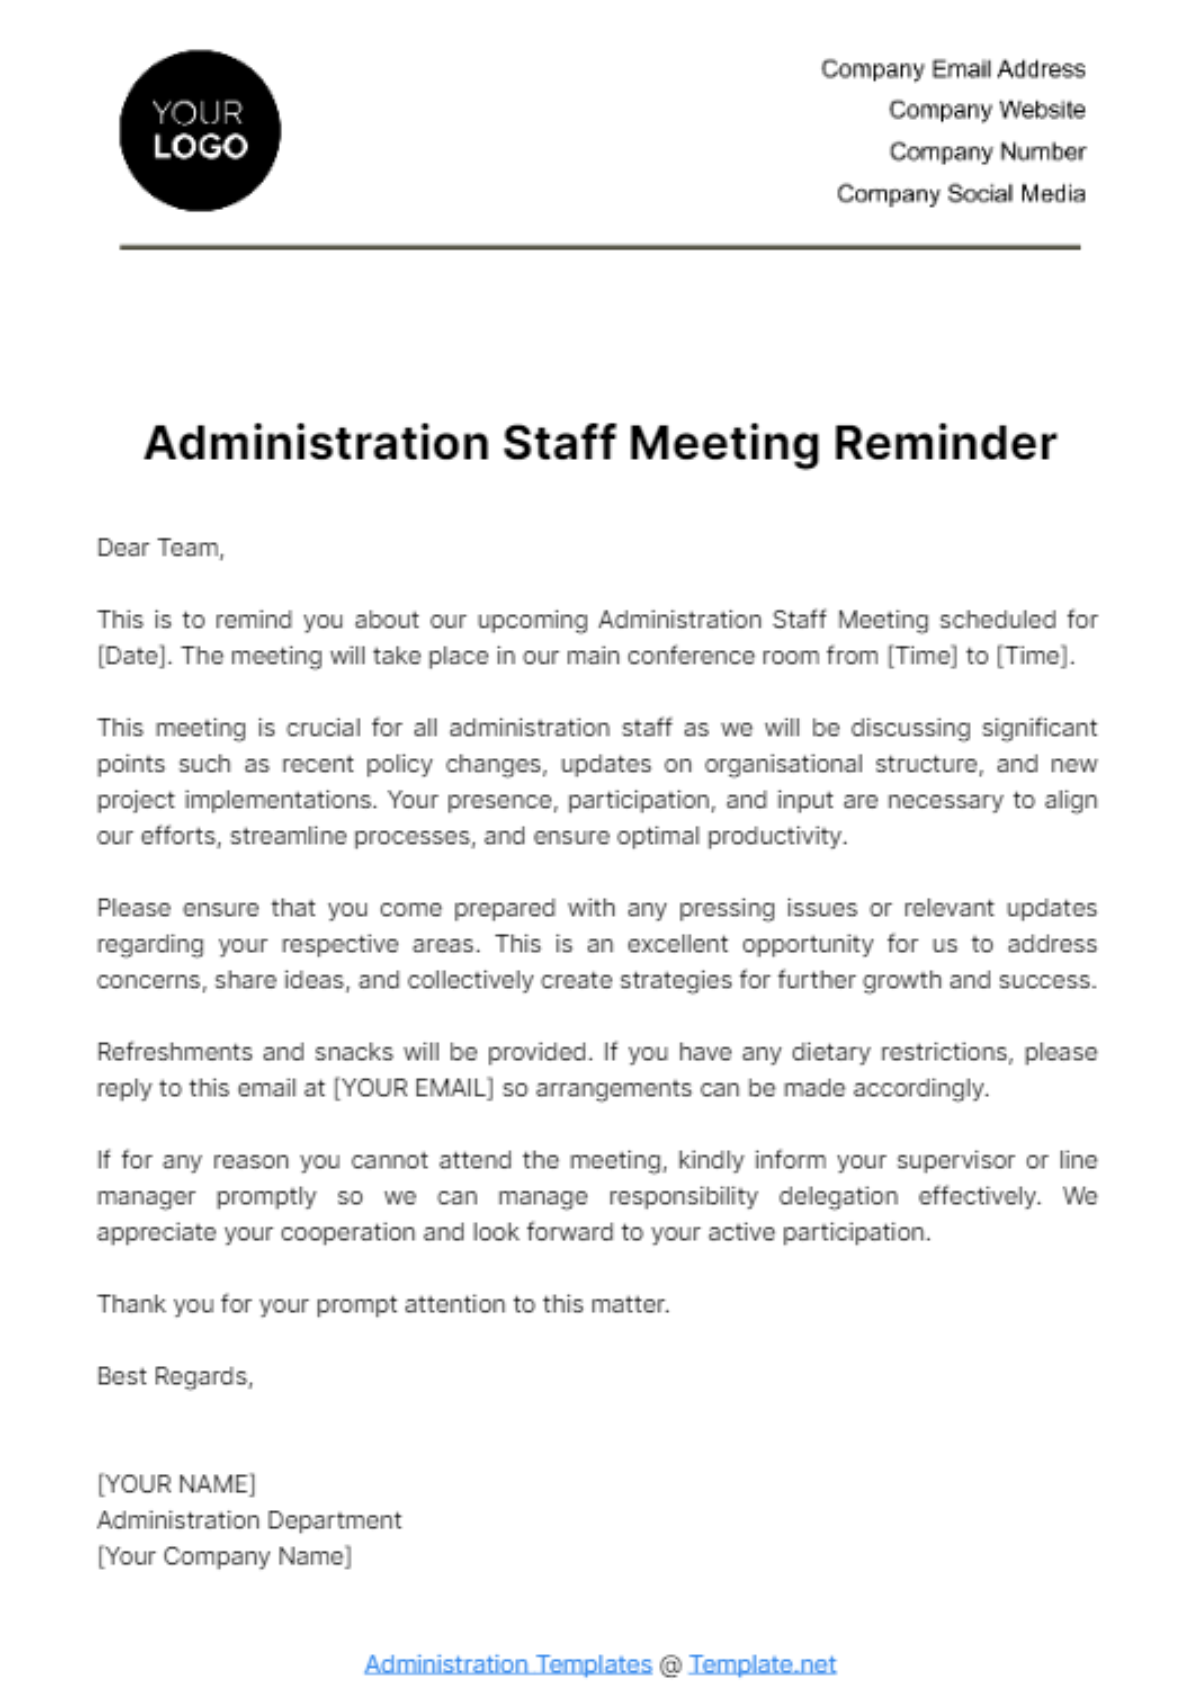 Free Administration Staff Meeting Reminder Template